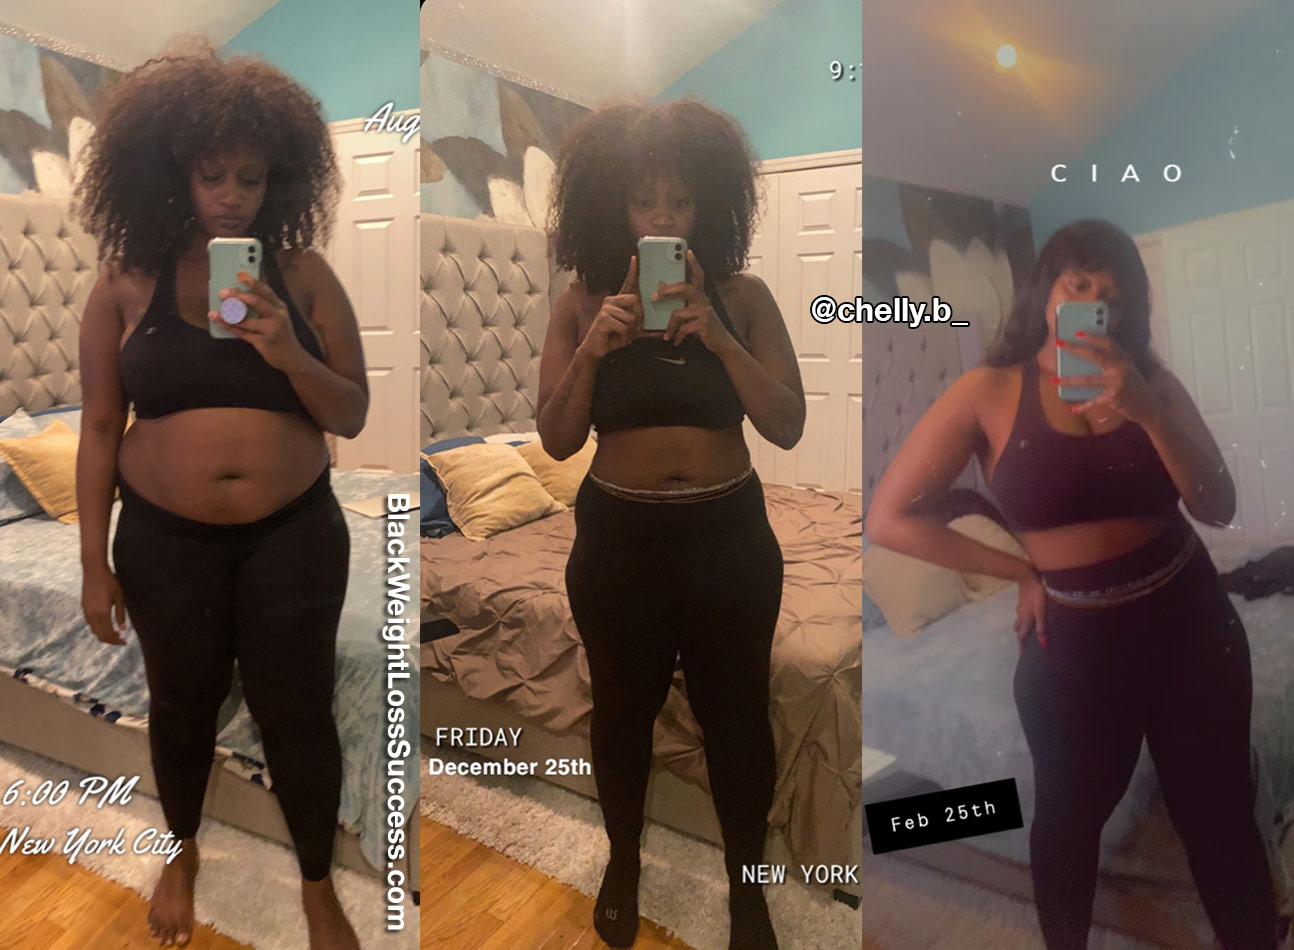 Chelly lost 48 pounds